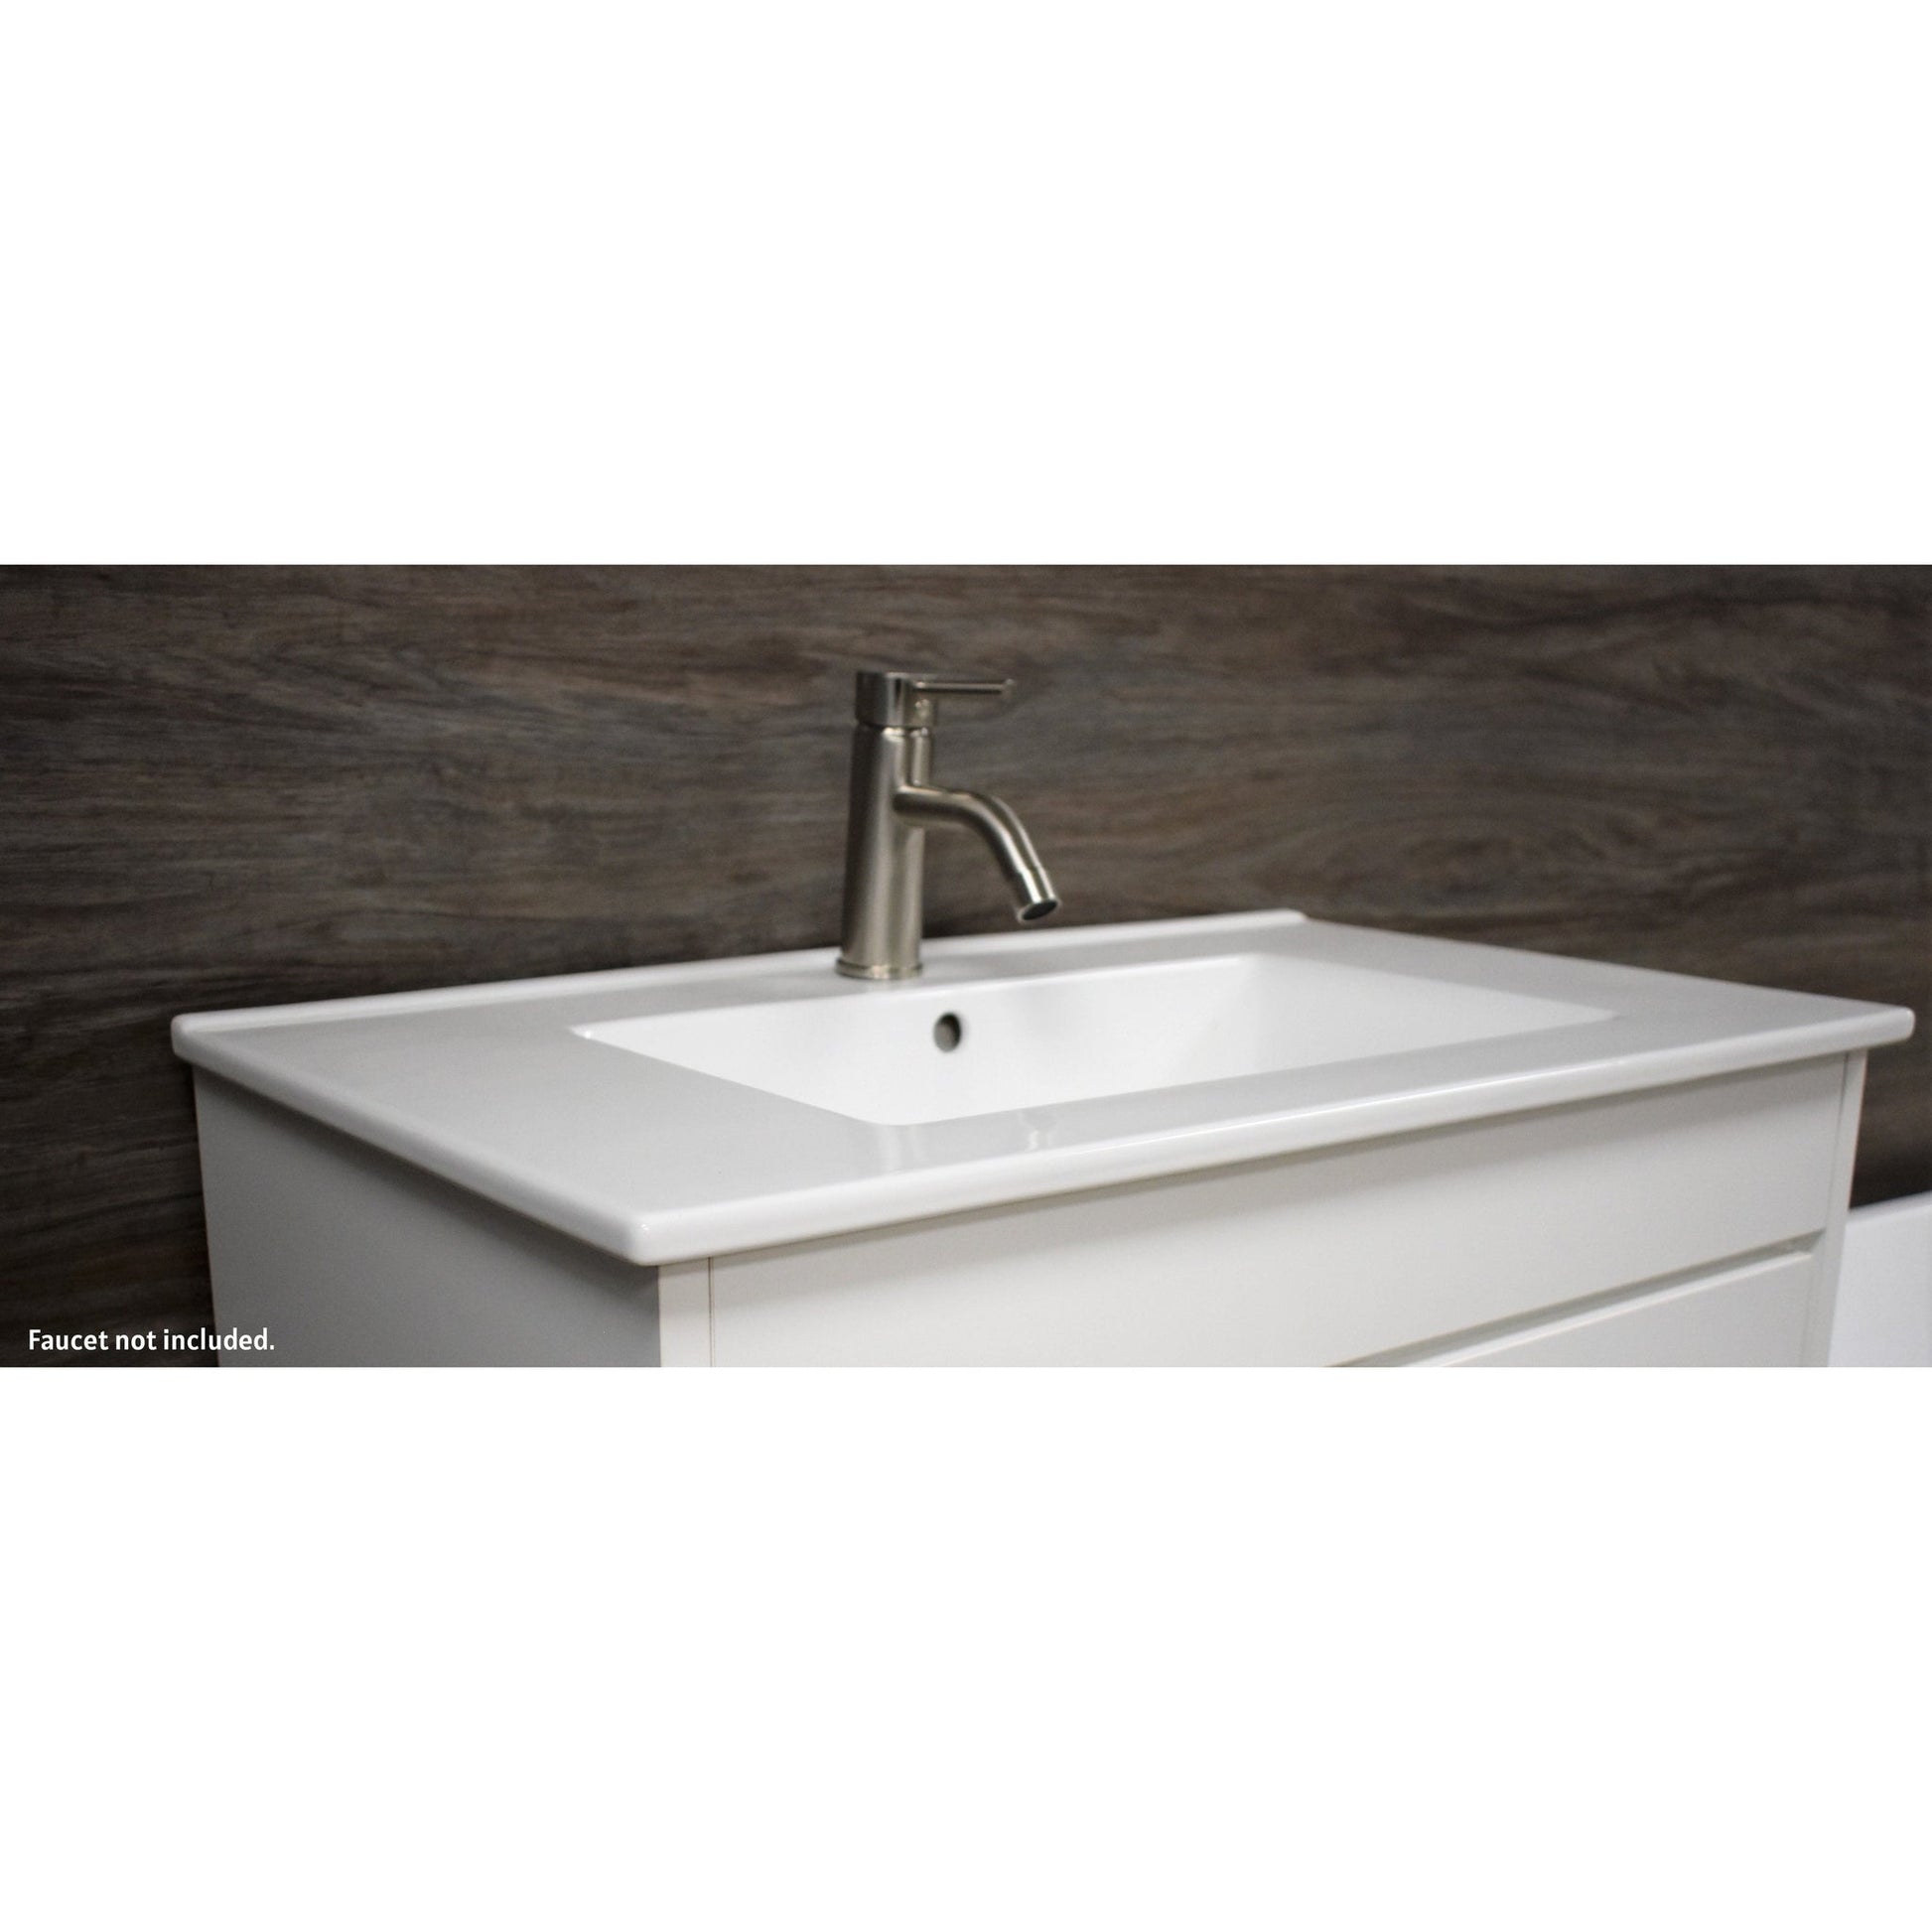 Volpa USA Villa 30" White Freestanding Modern Bathroom Vanity With Integrated Ceramic Top and Brushed Nickel Round Handles